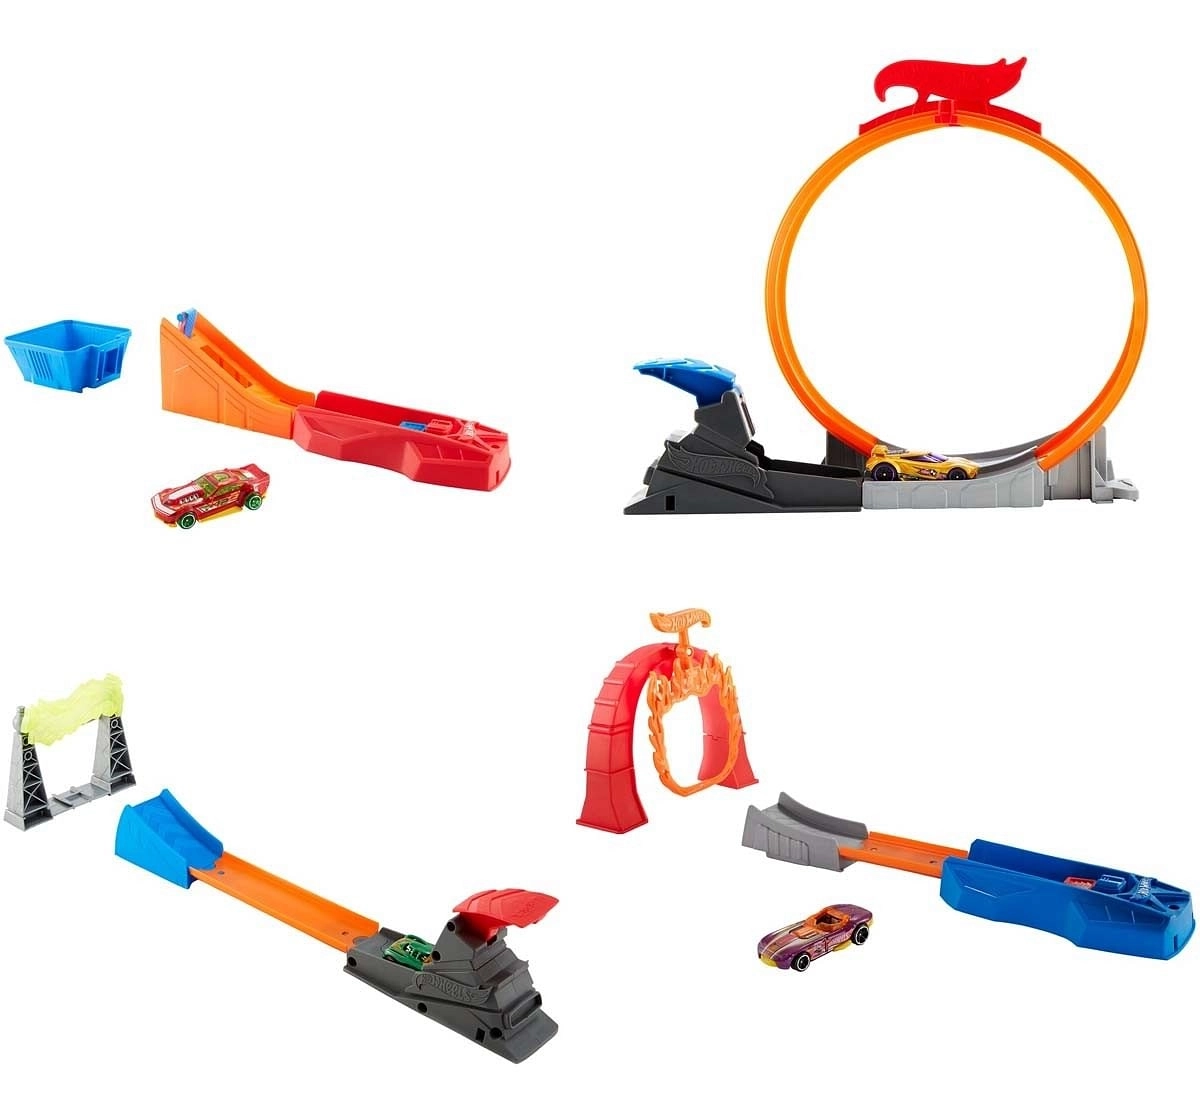 Hotwheels Classic Stunt Cars  Tracksets & Train Sets for Kids Age 4Y+, Assorted